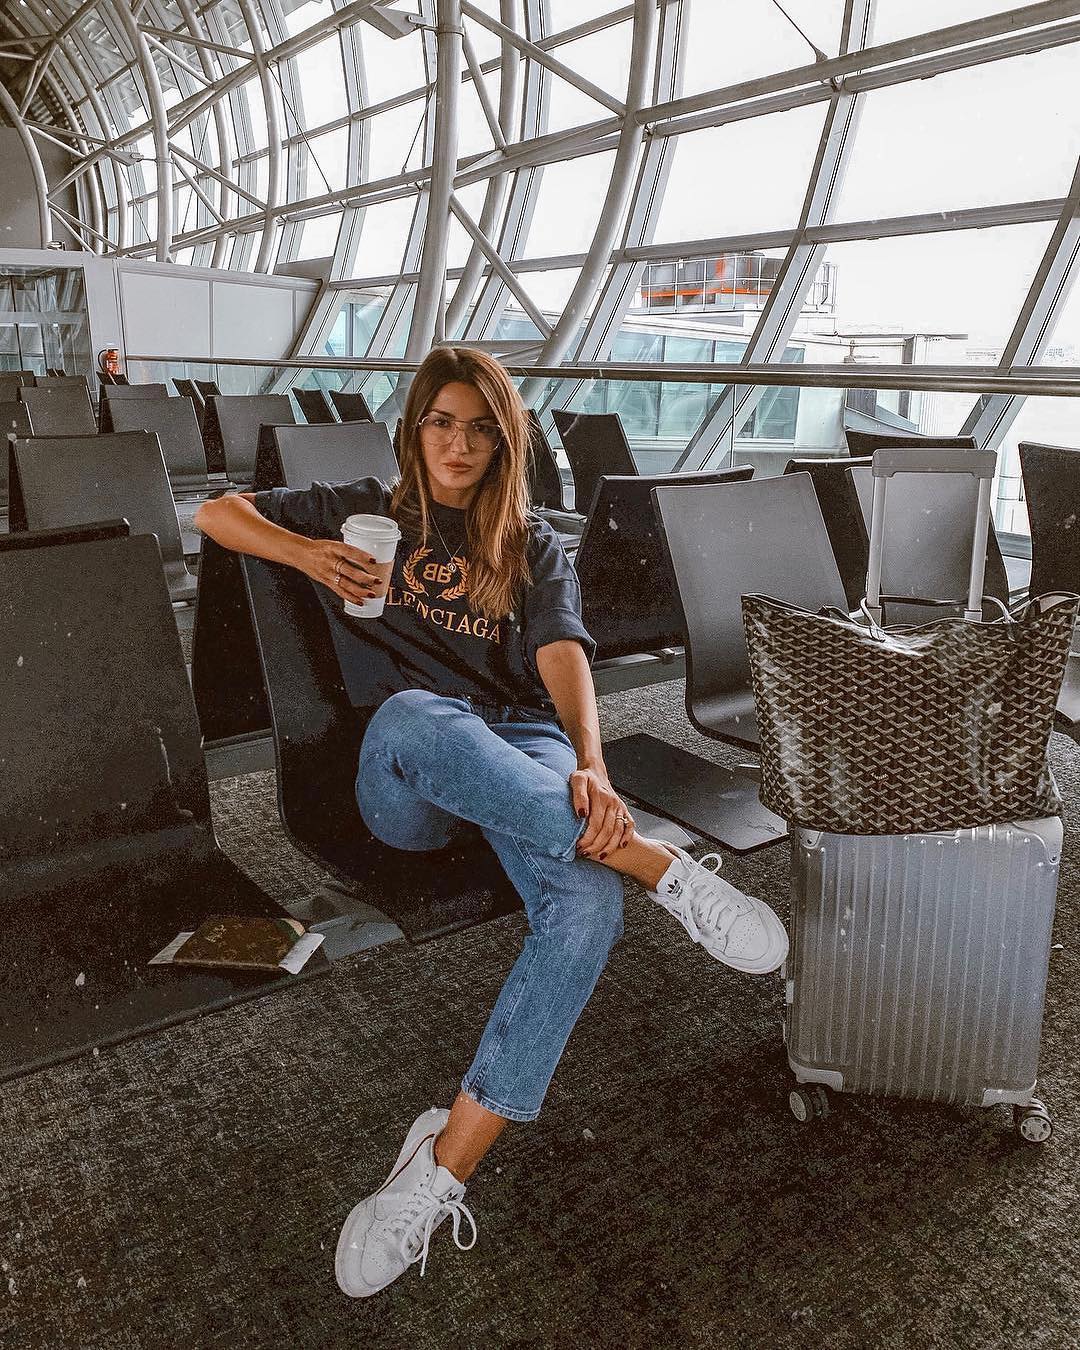 Summer airport outfit idea: T-shirt, jeans and kicks 2021